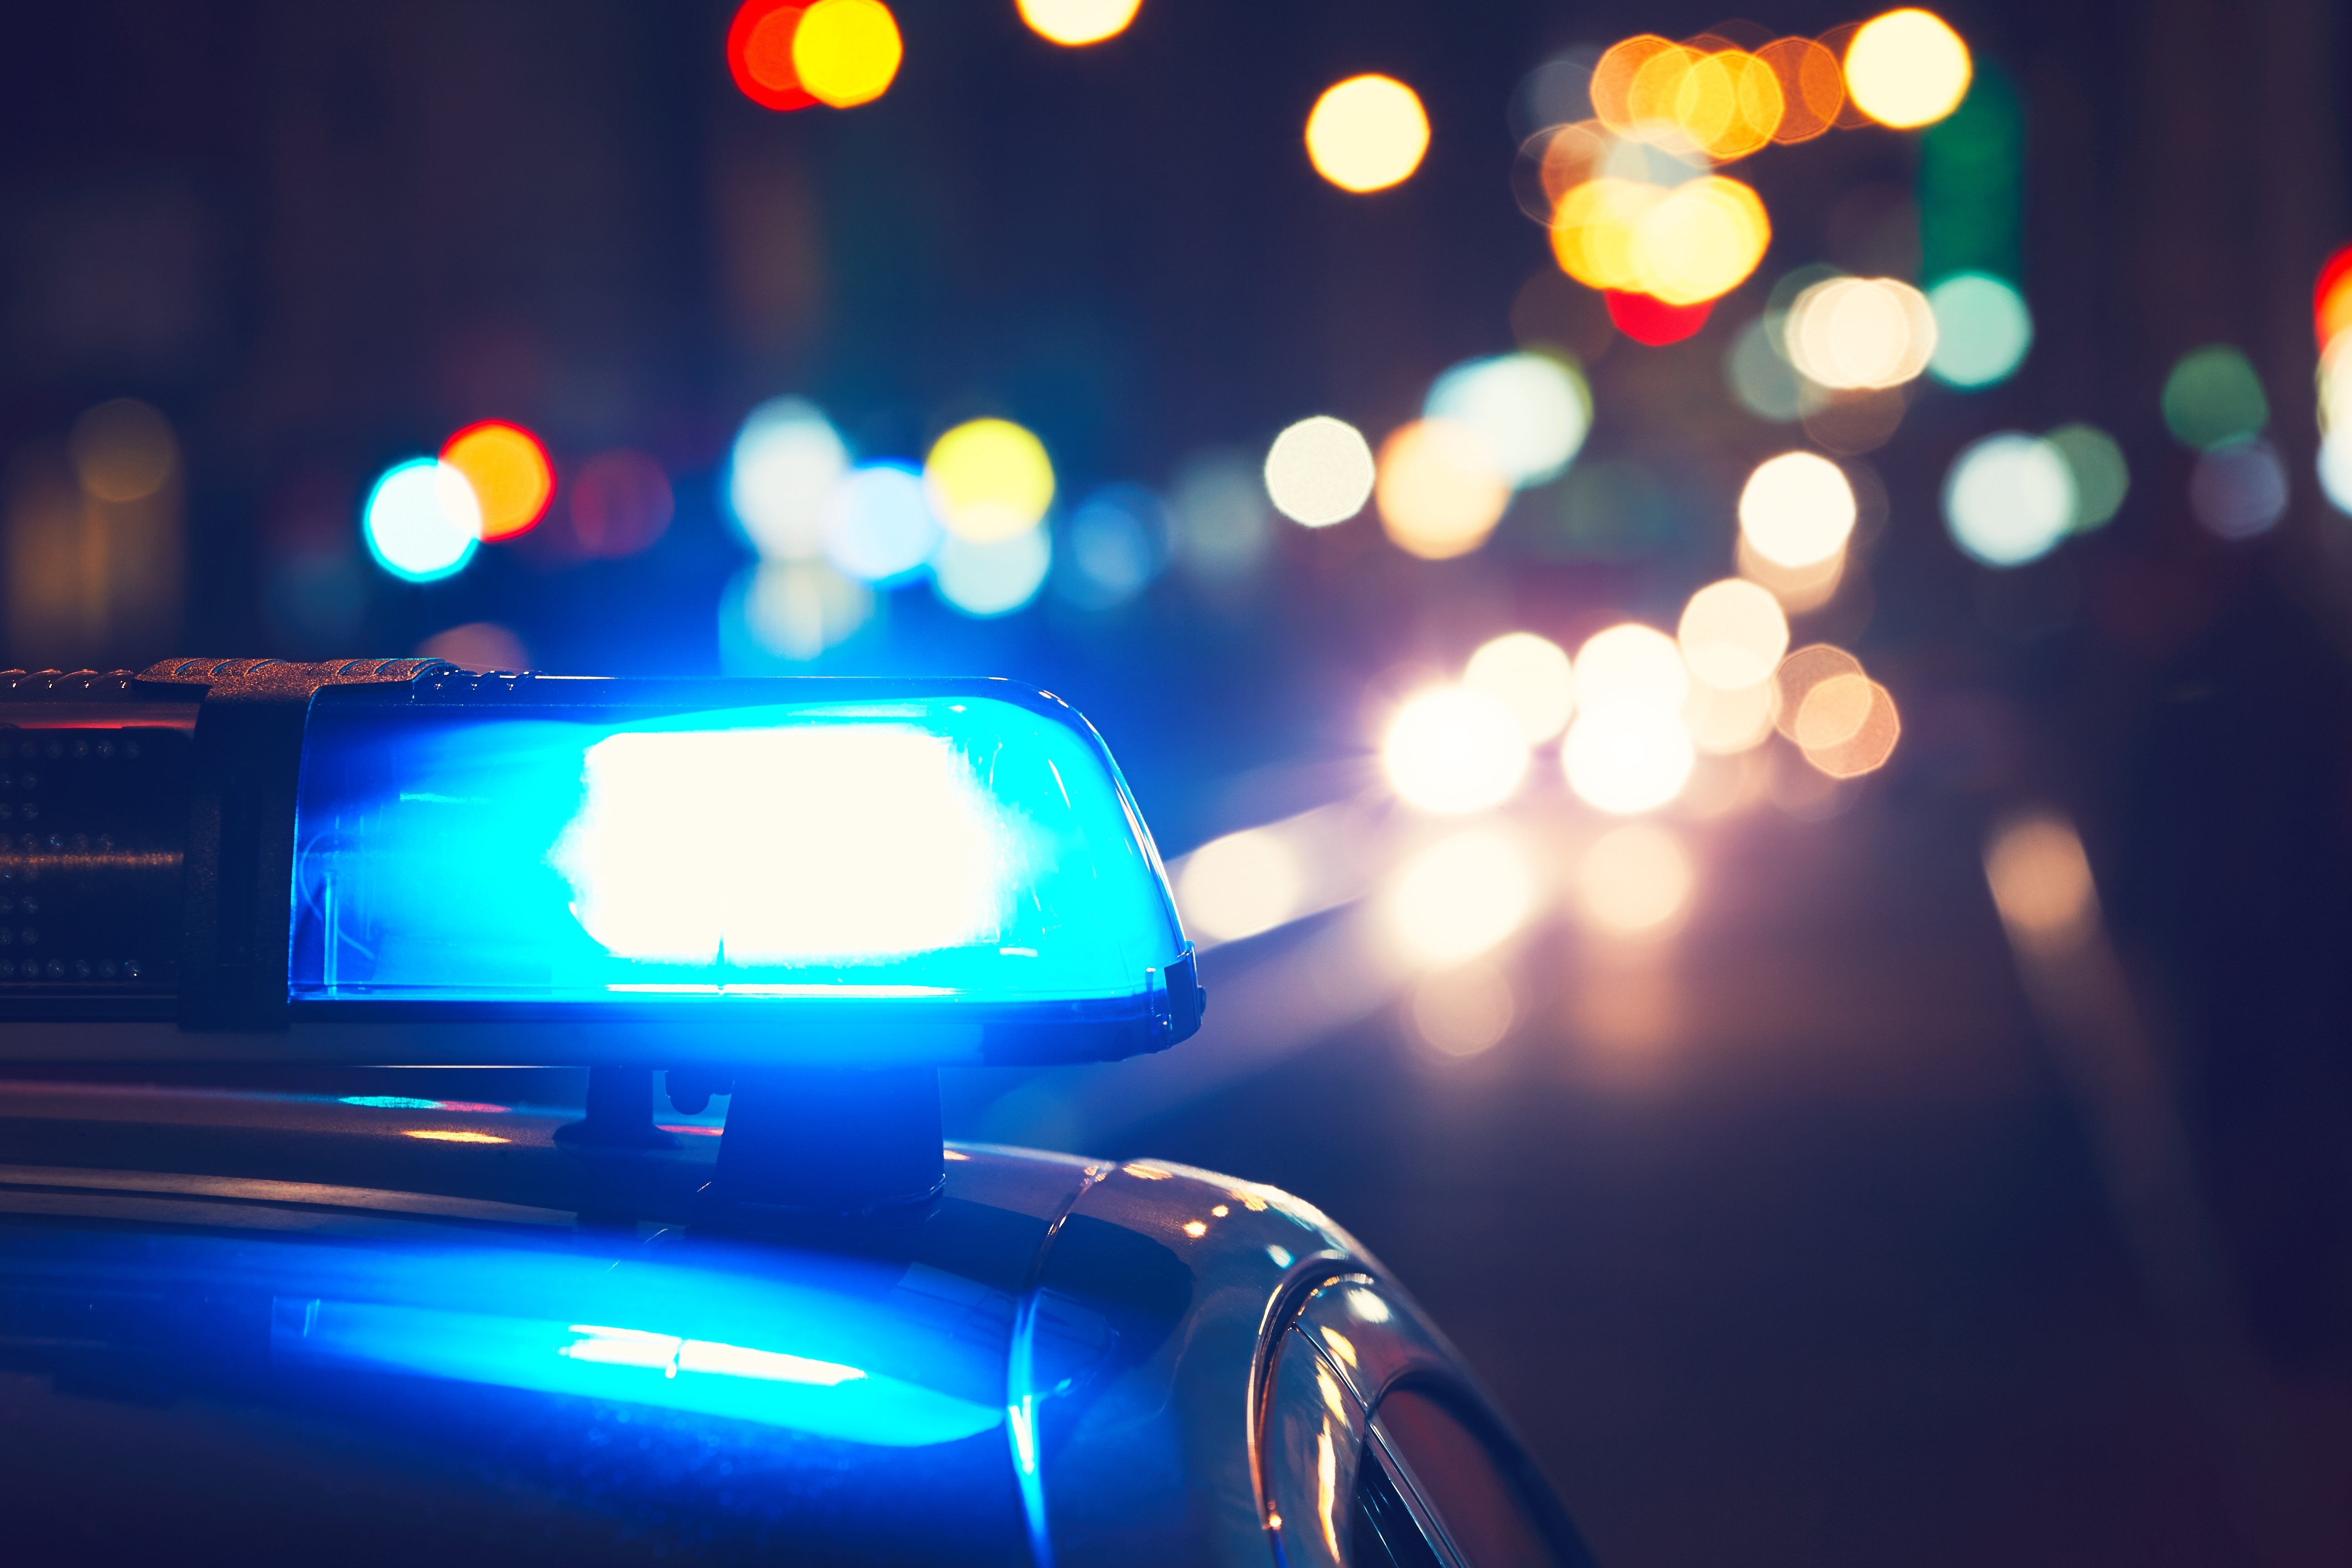 Close-Up Of Blue Siren On Police Car At Night| Photo: Getty Images